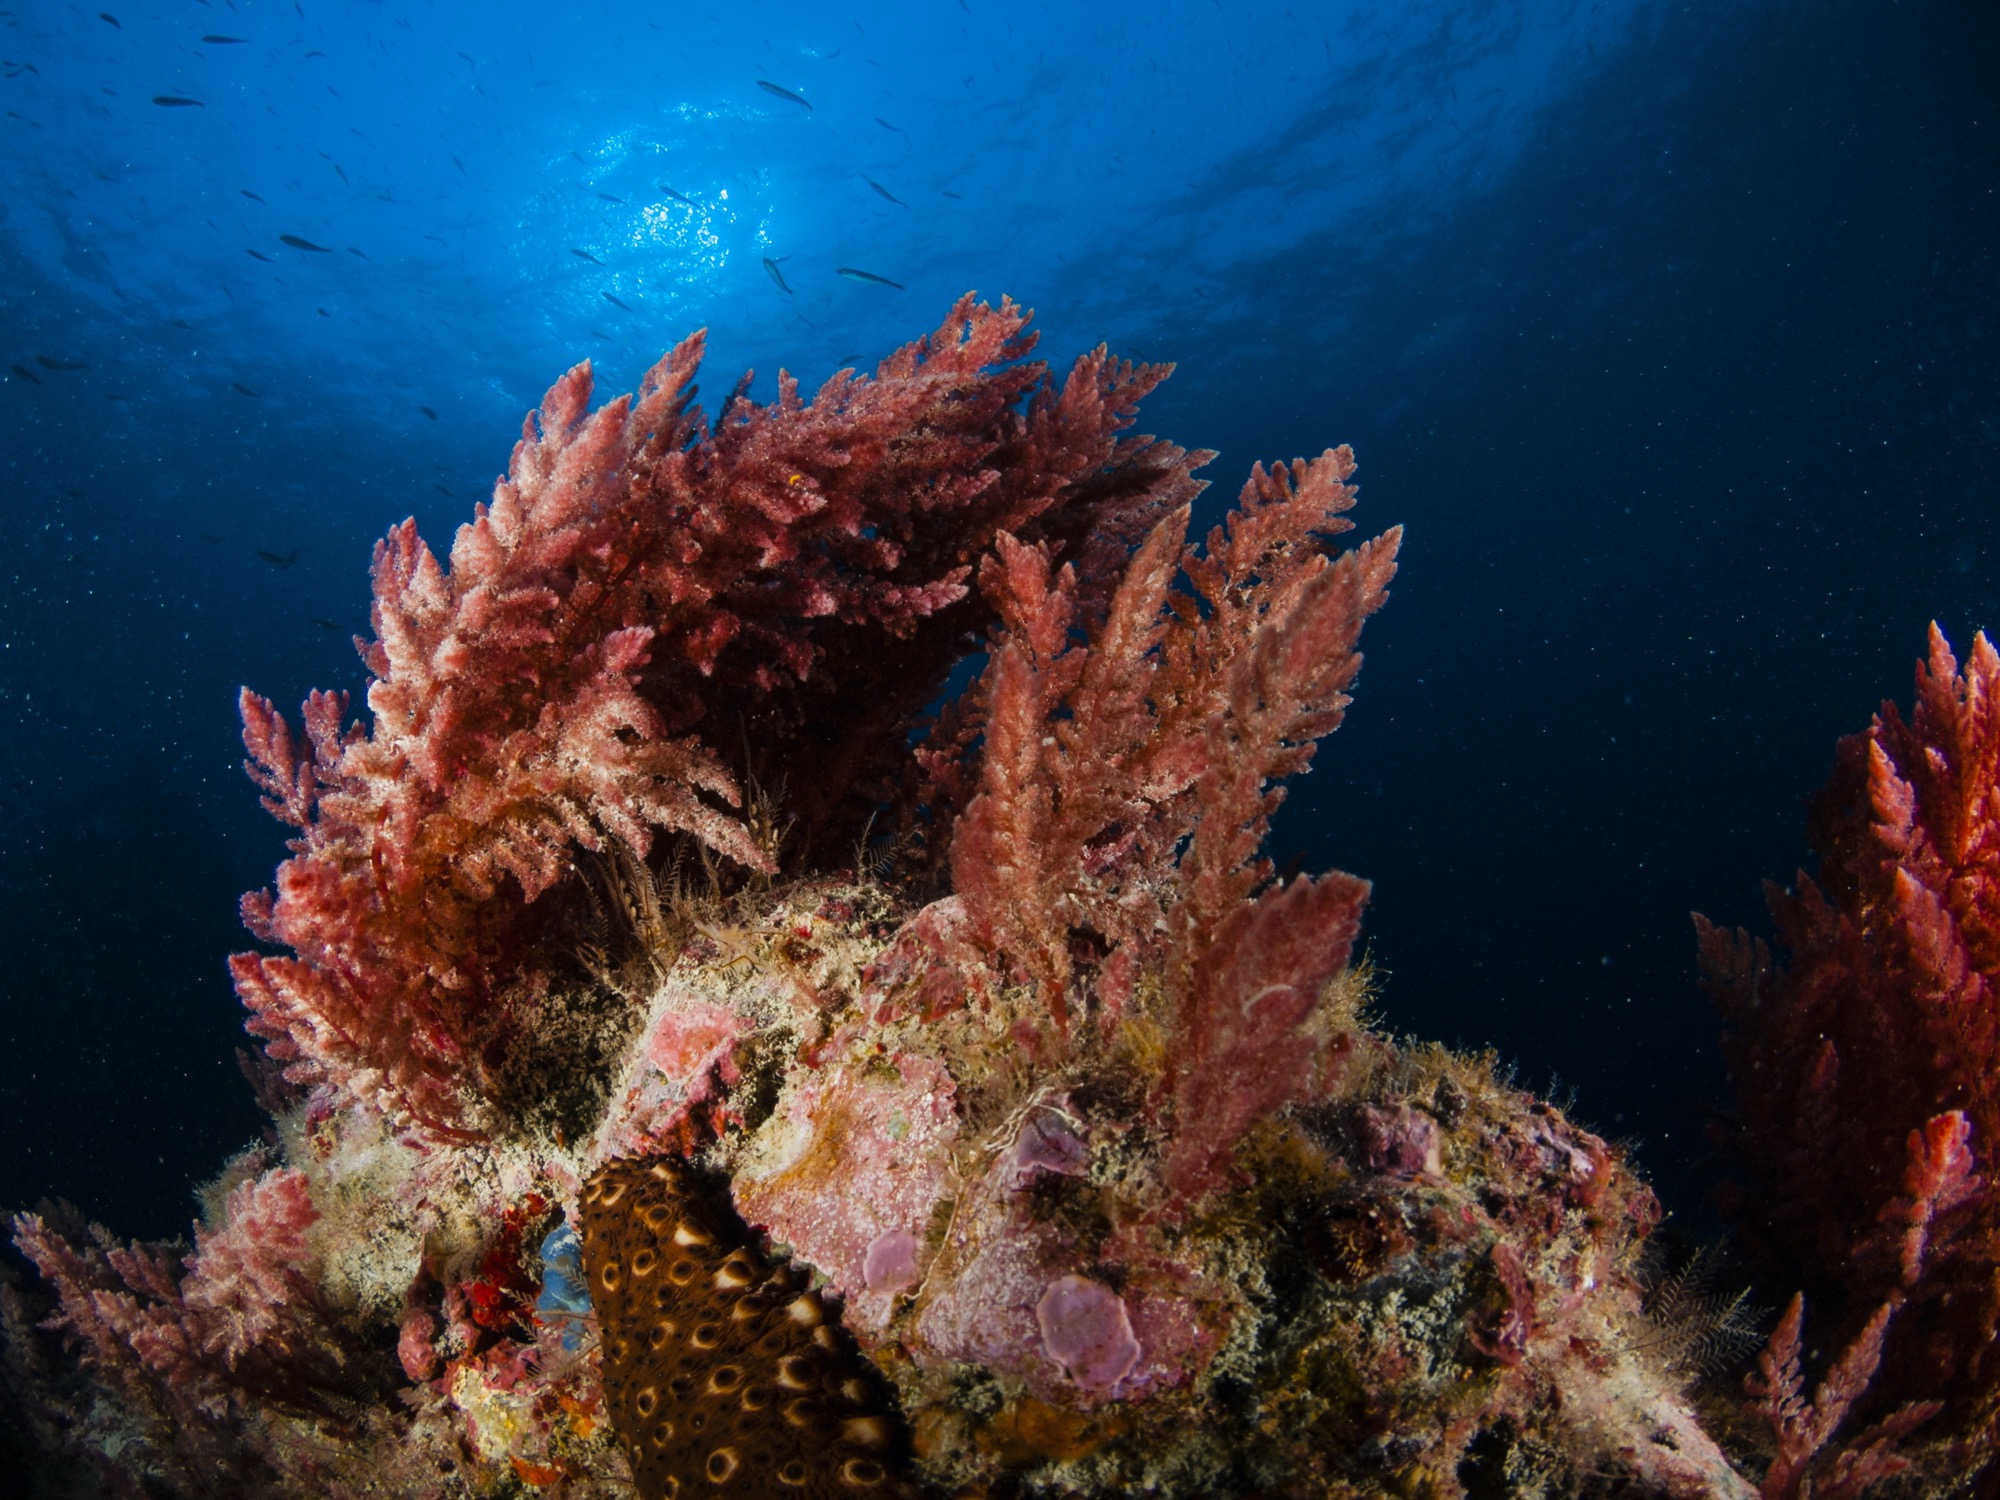 A red seaweed deeper on the ocean floor, and an example of how ocean plants and coral work together to build underwater reefs